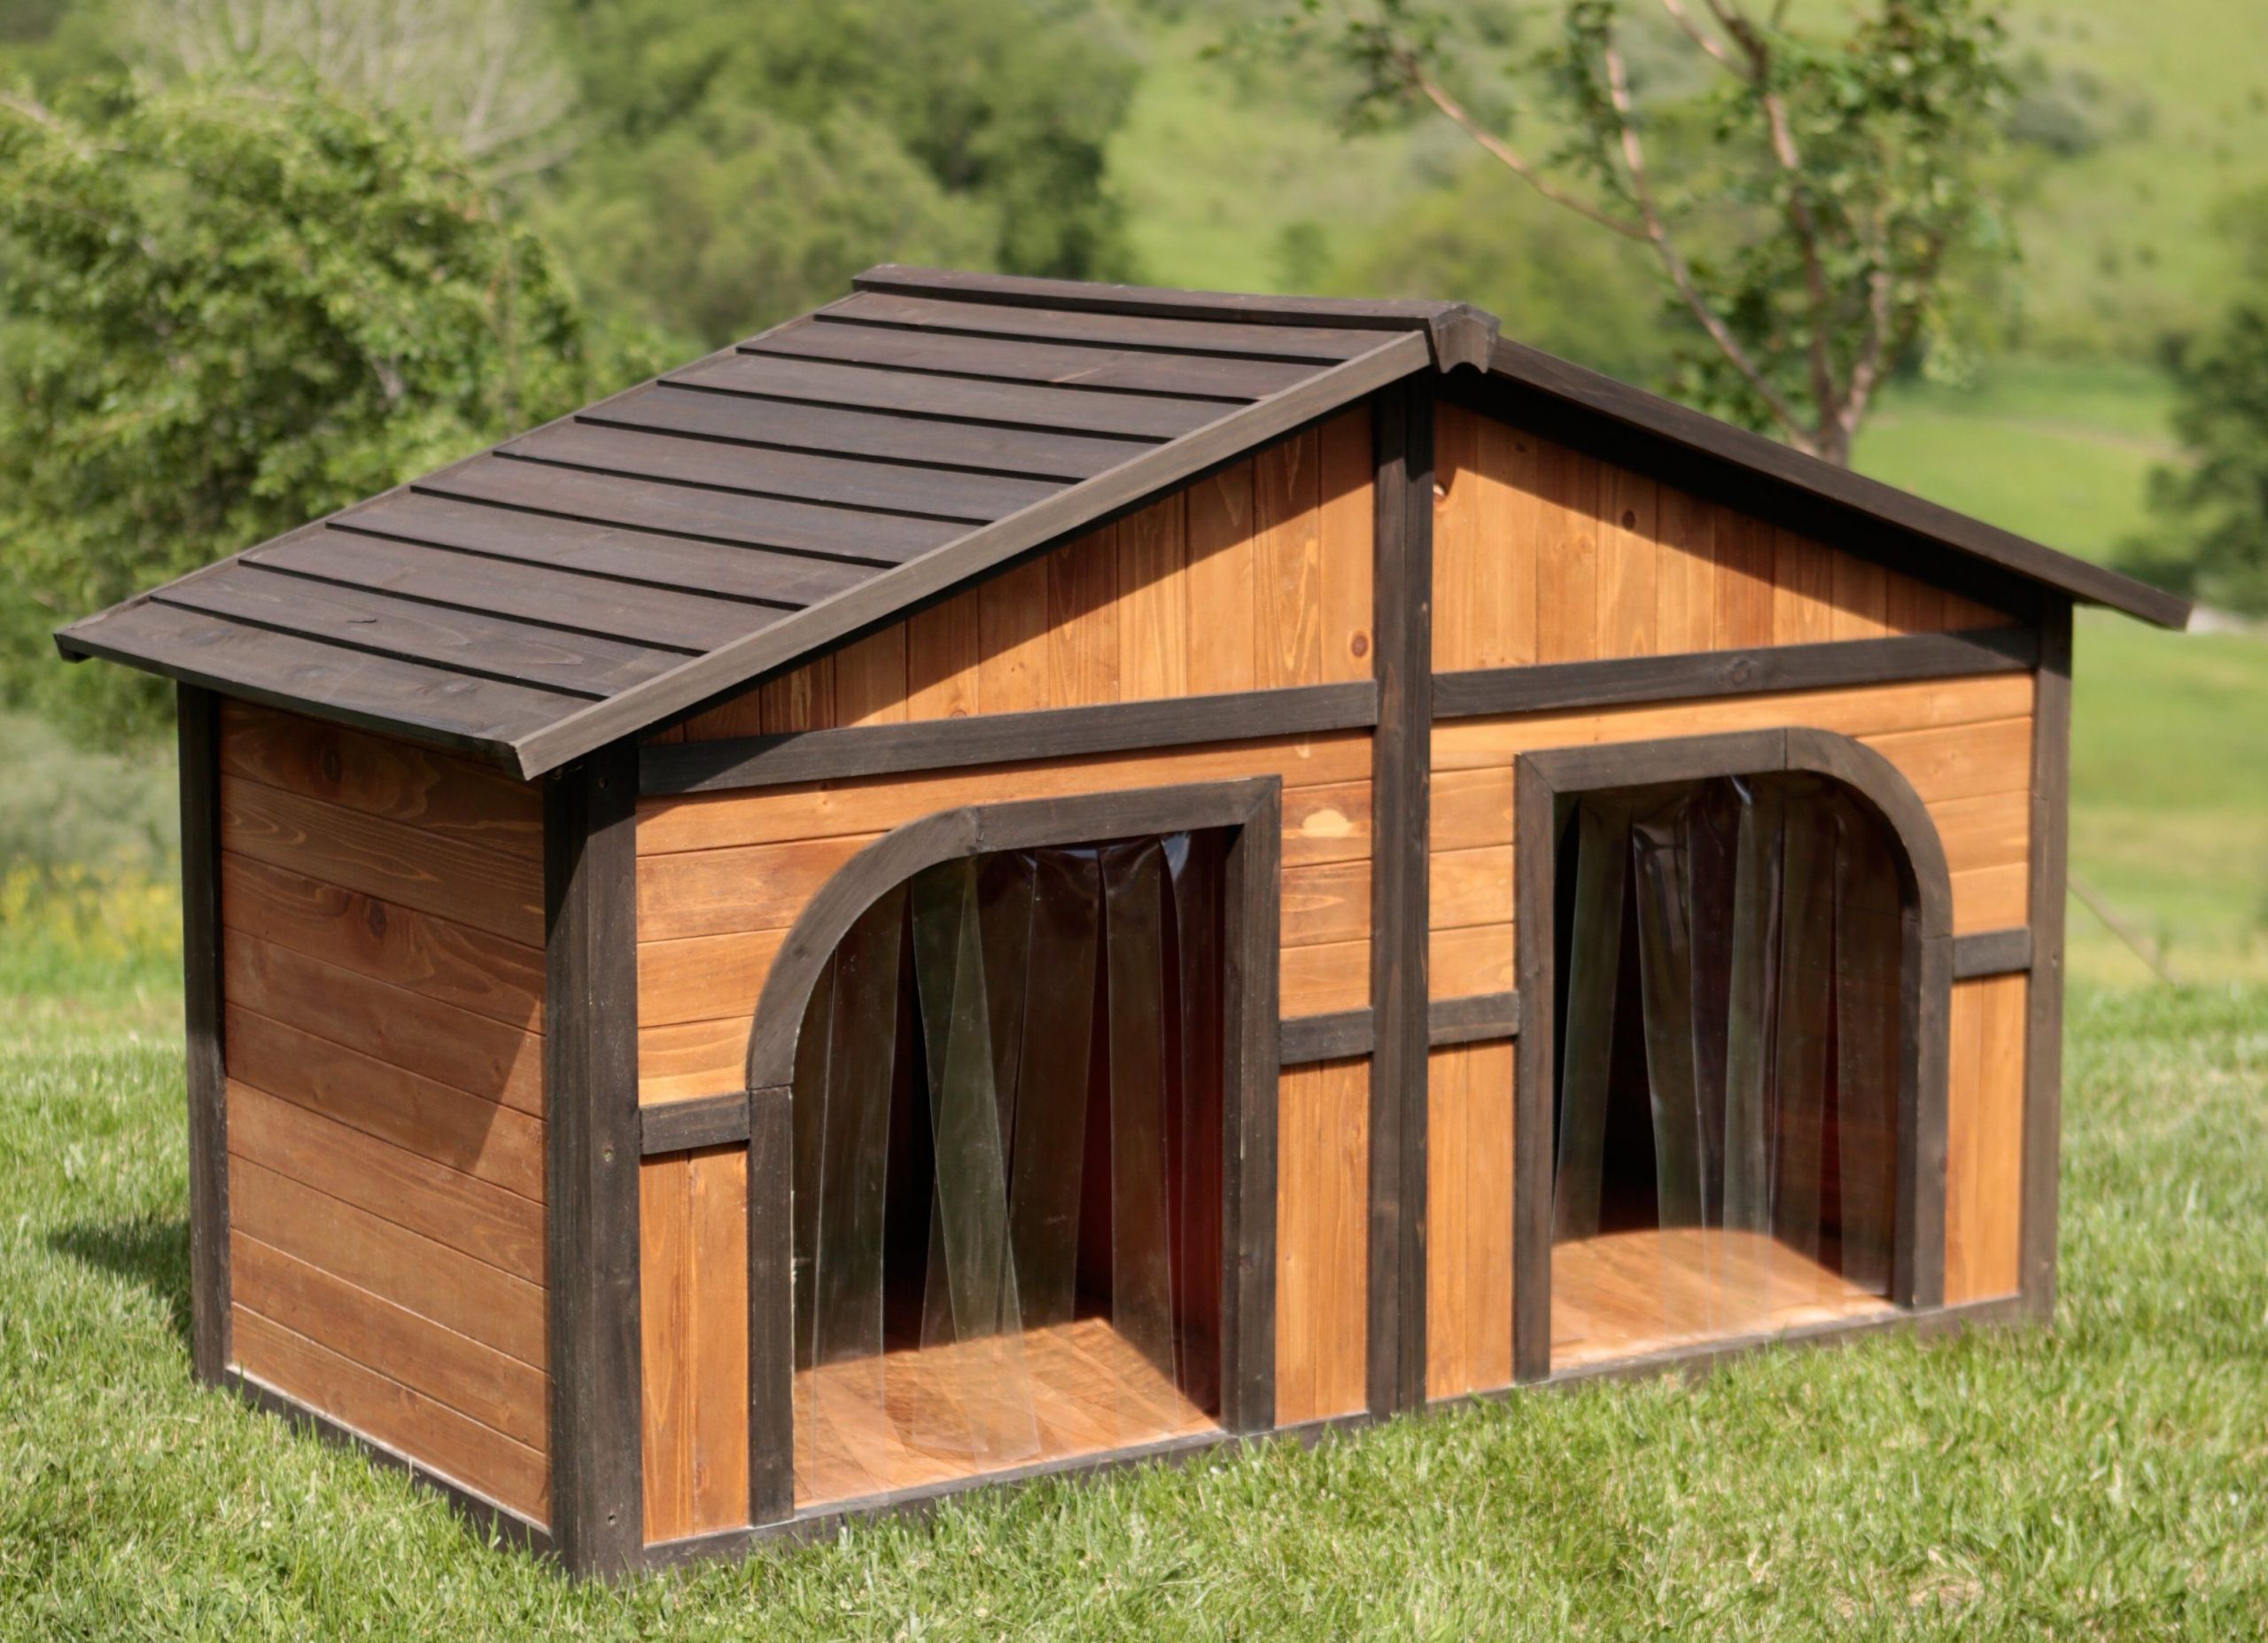 DIY Wood Dog House
 10 Simple But Beautiful DIY Dog House Designs That You Can